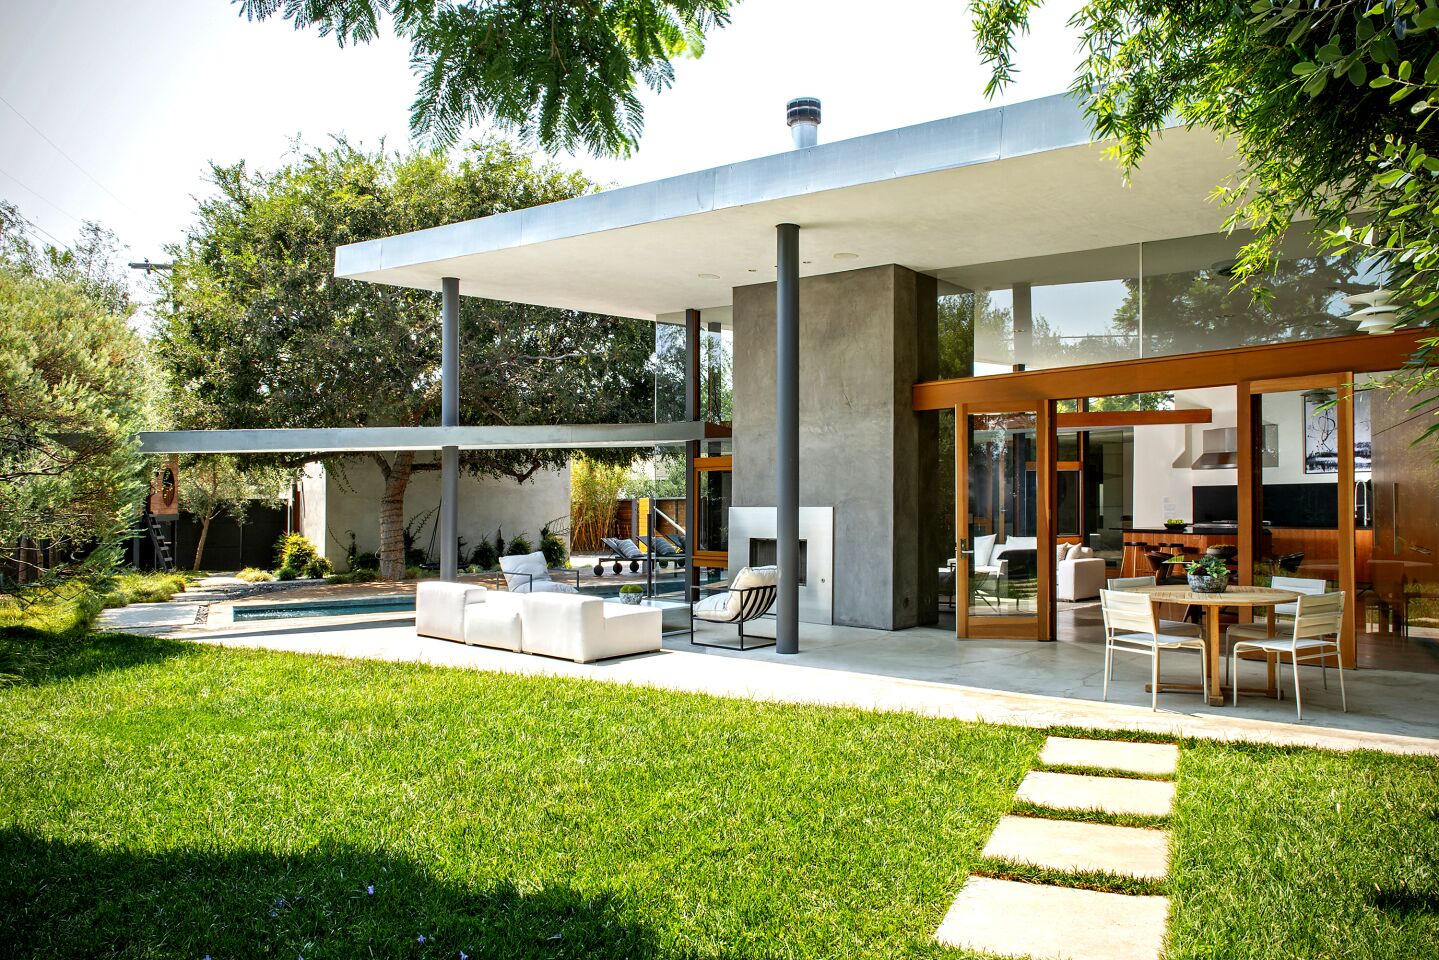 The Mar Vista modern is listed for $3.995 million.